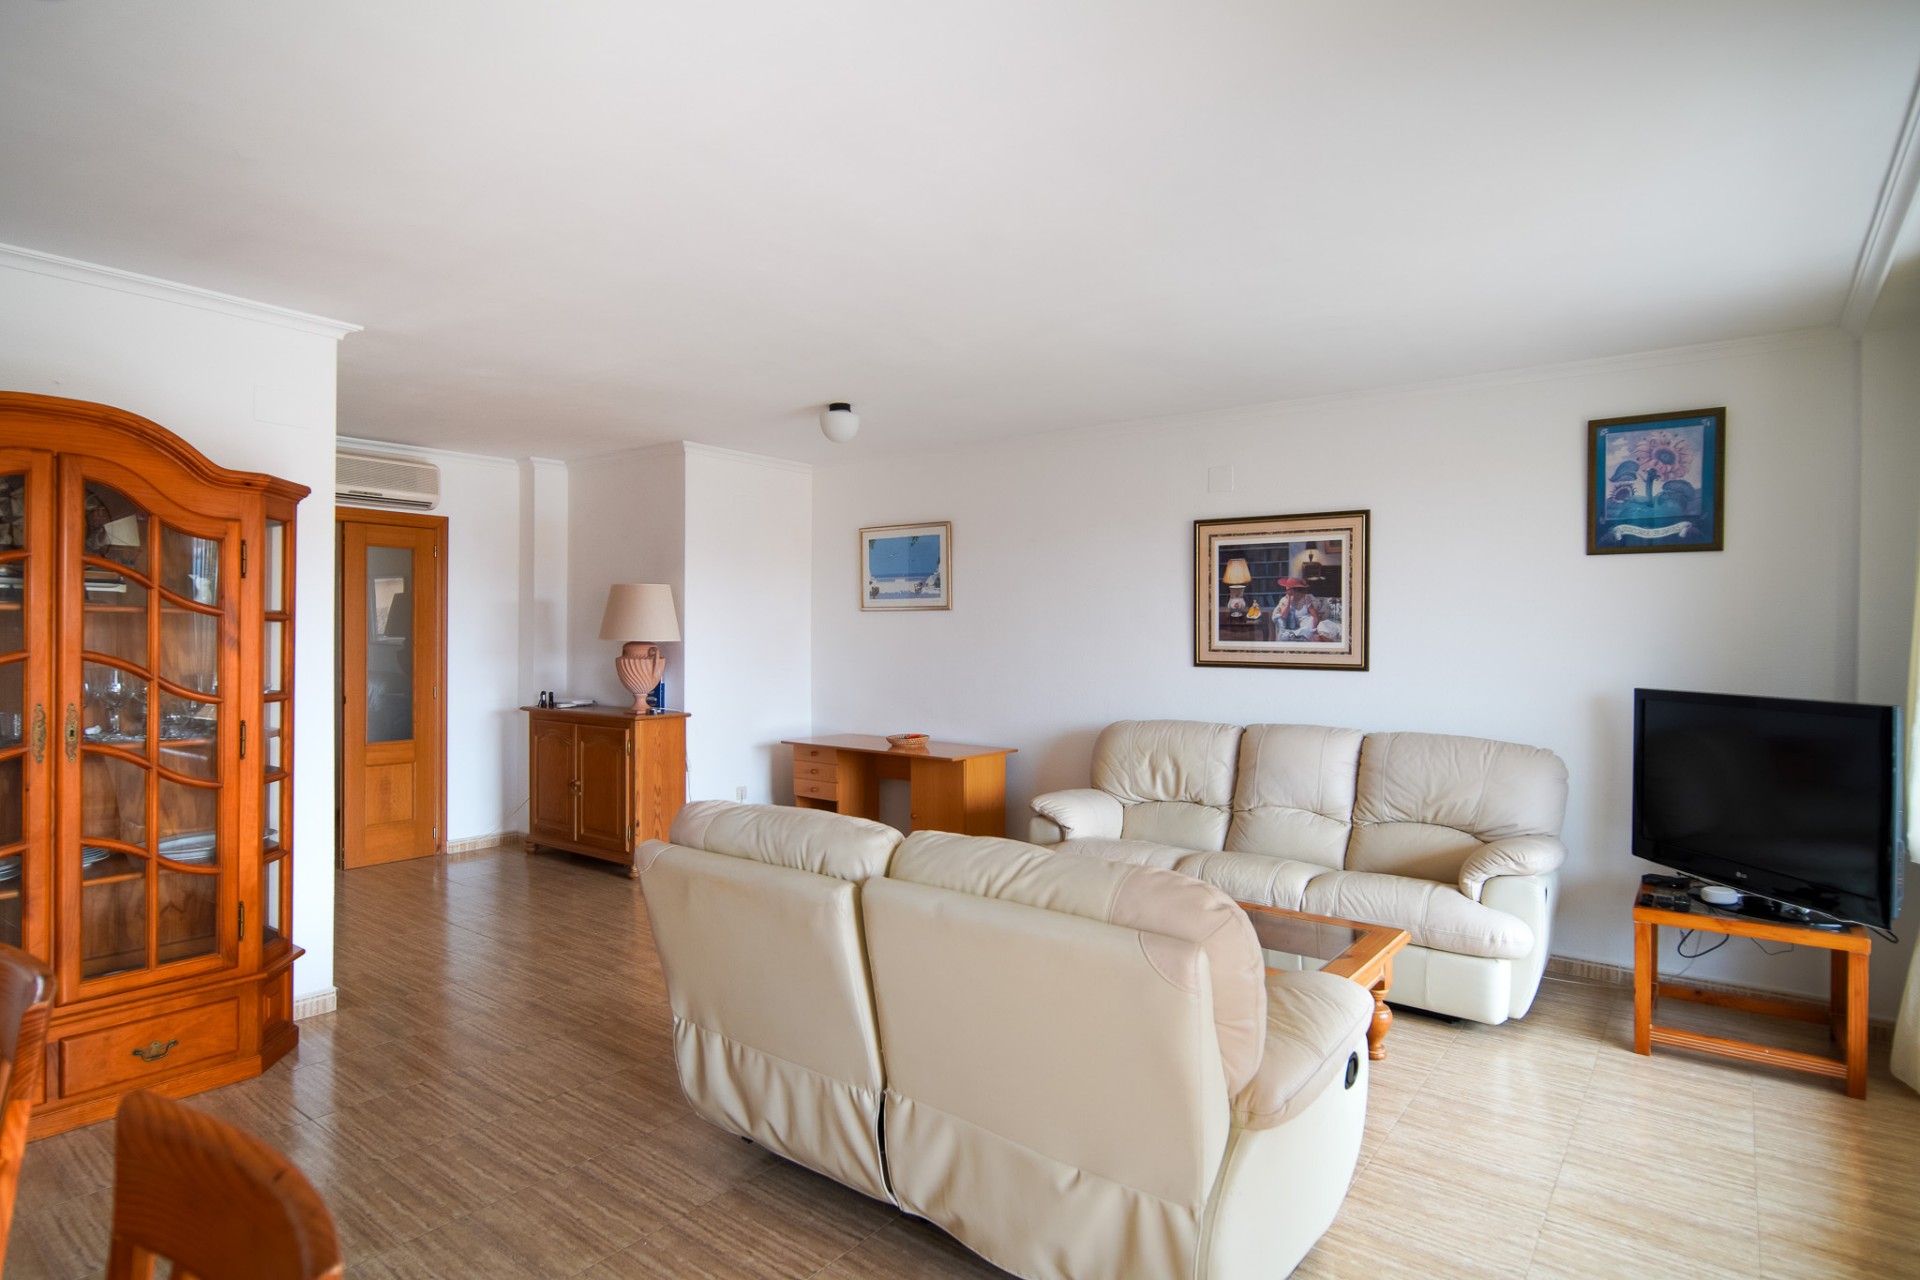 Three Bedroom Penthouse For Sale In Javea's Arenal Beach